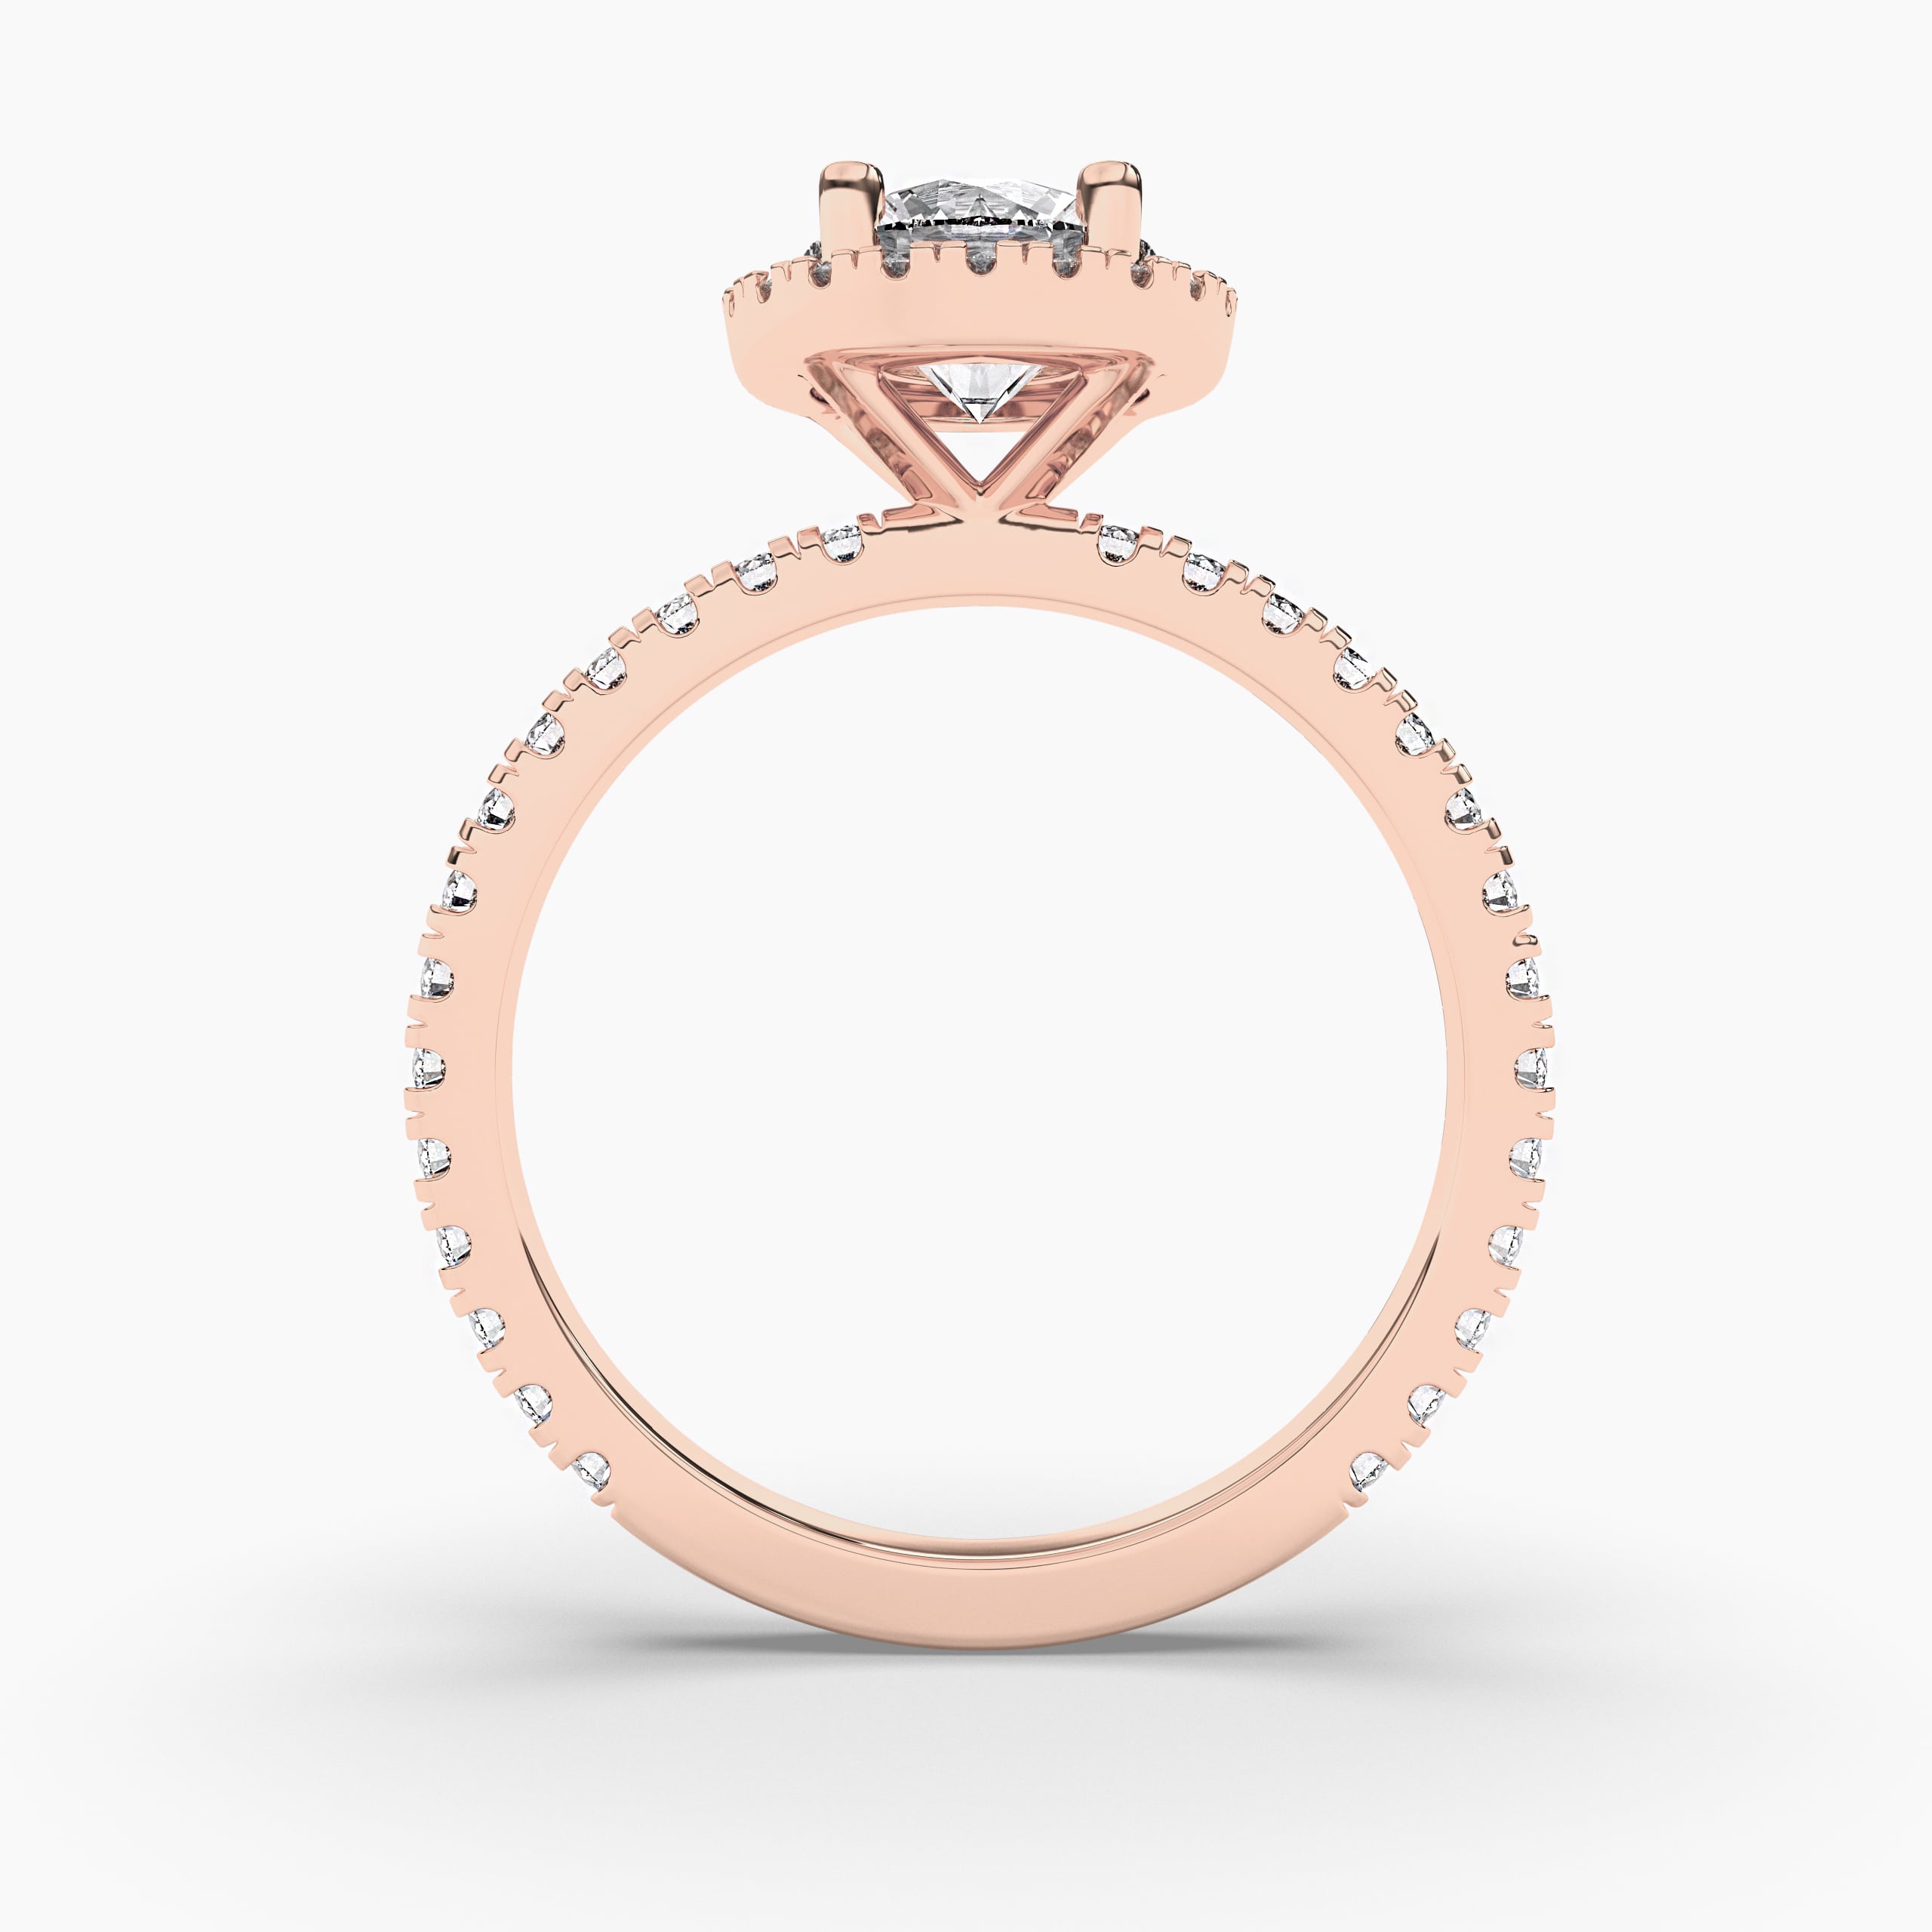 Emerald engagement ring rose gold round cut halo ring